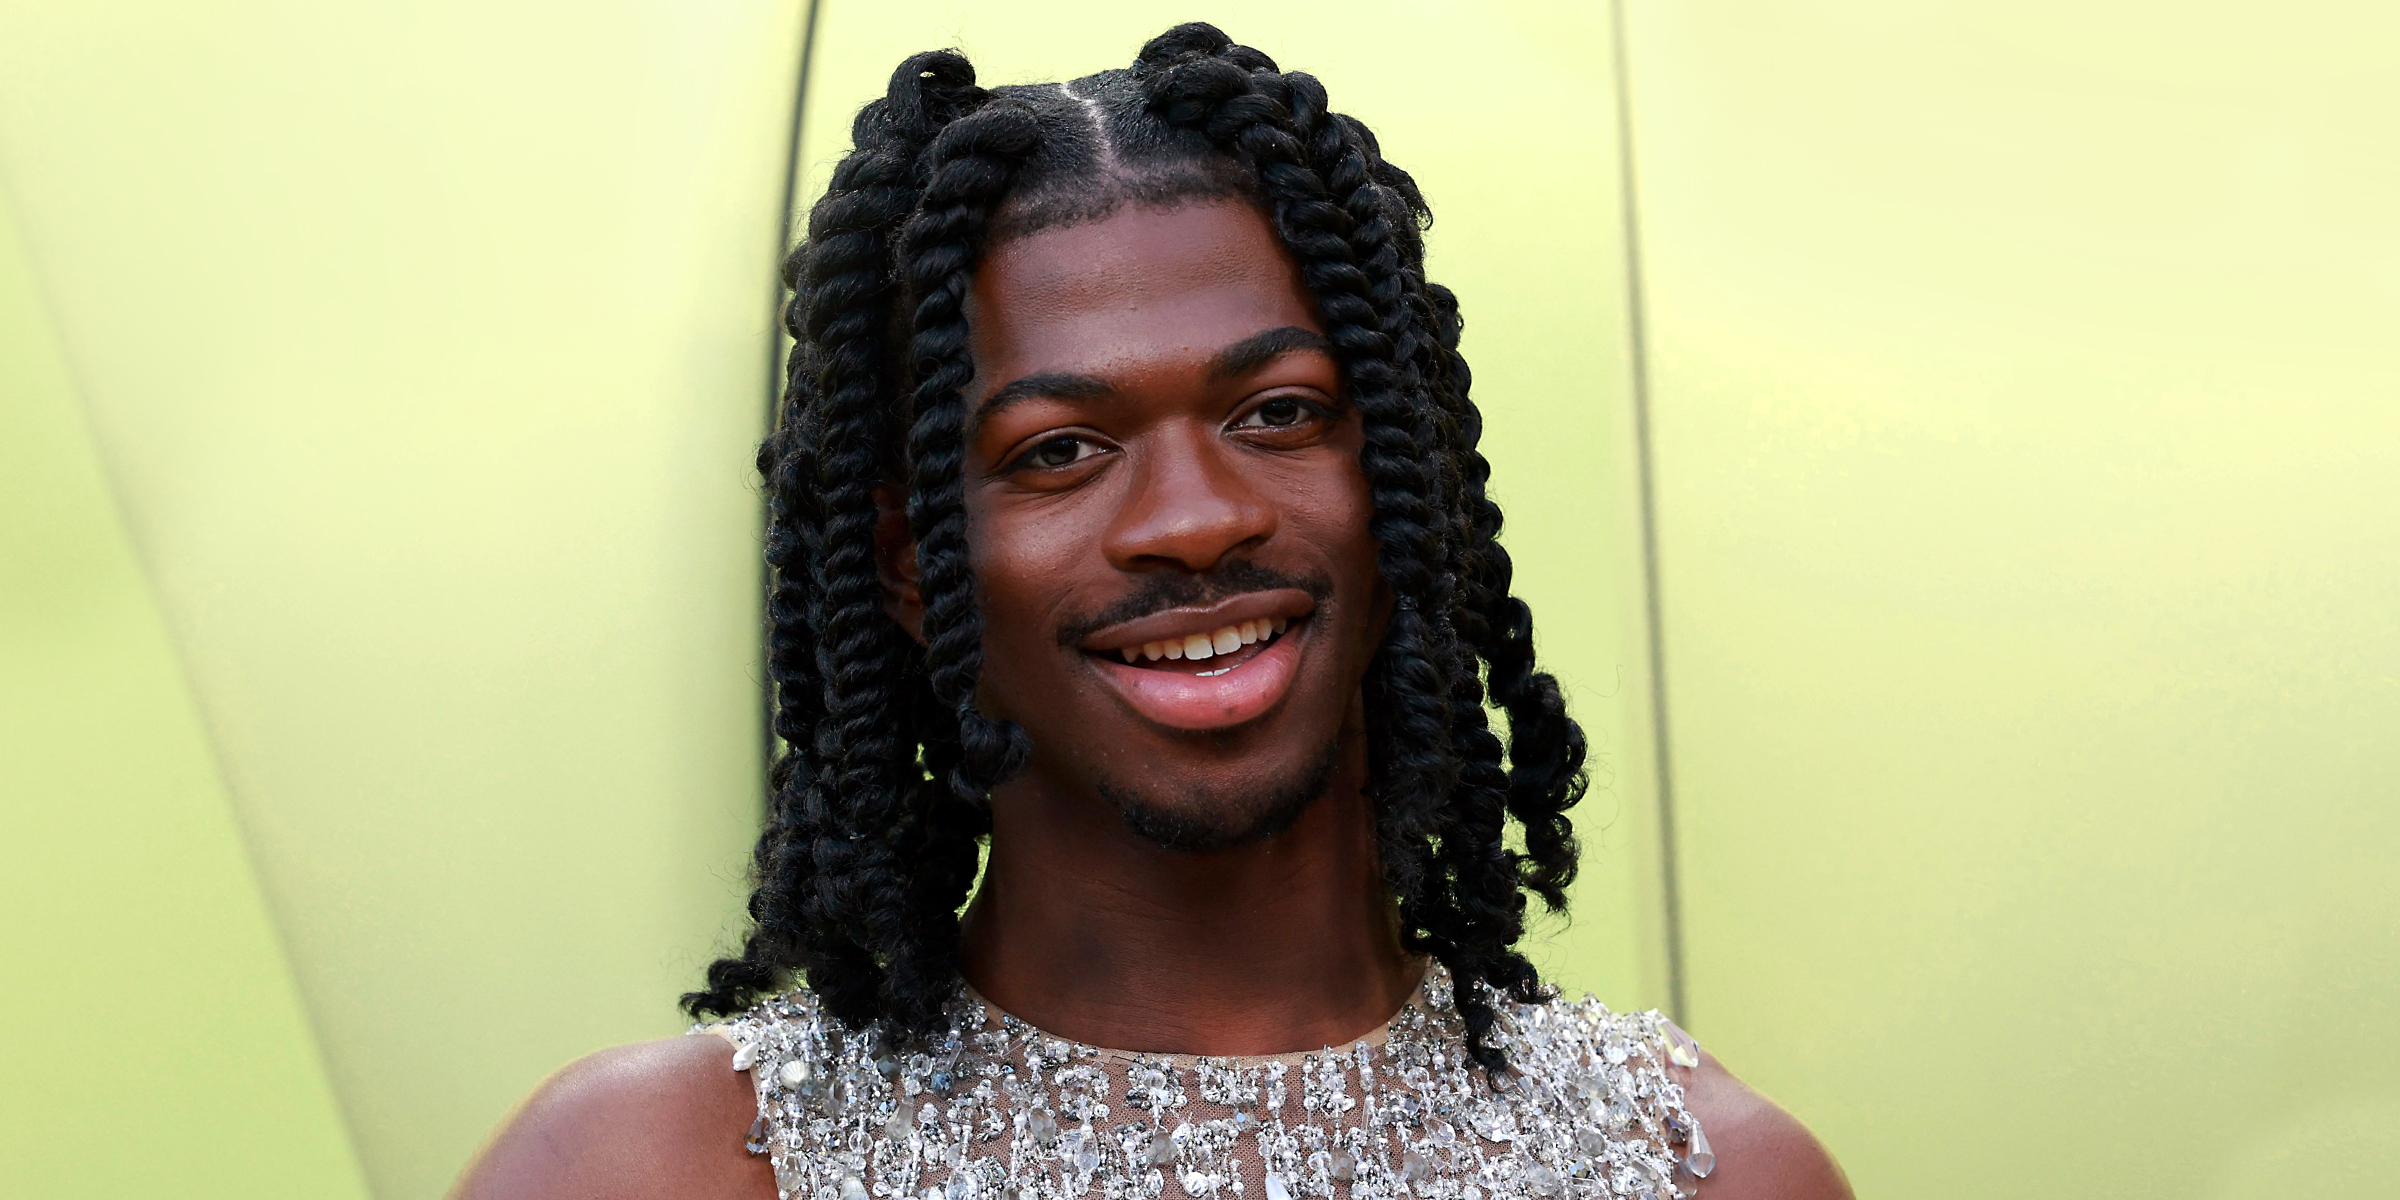 Lil Nas X | Source: Getty Images